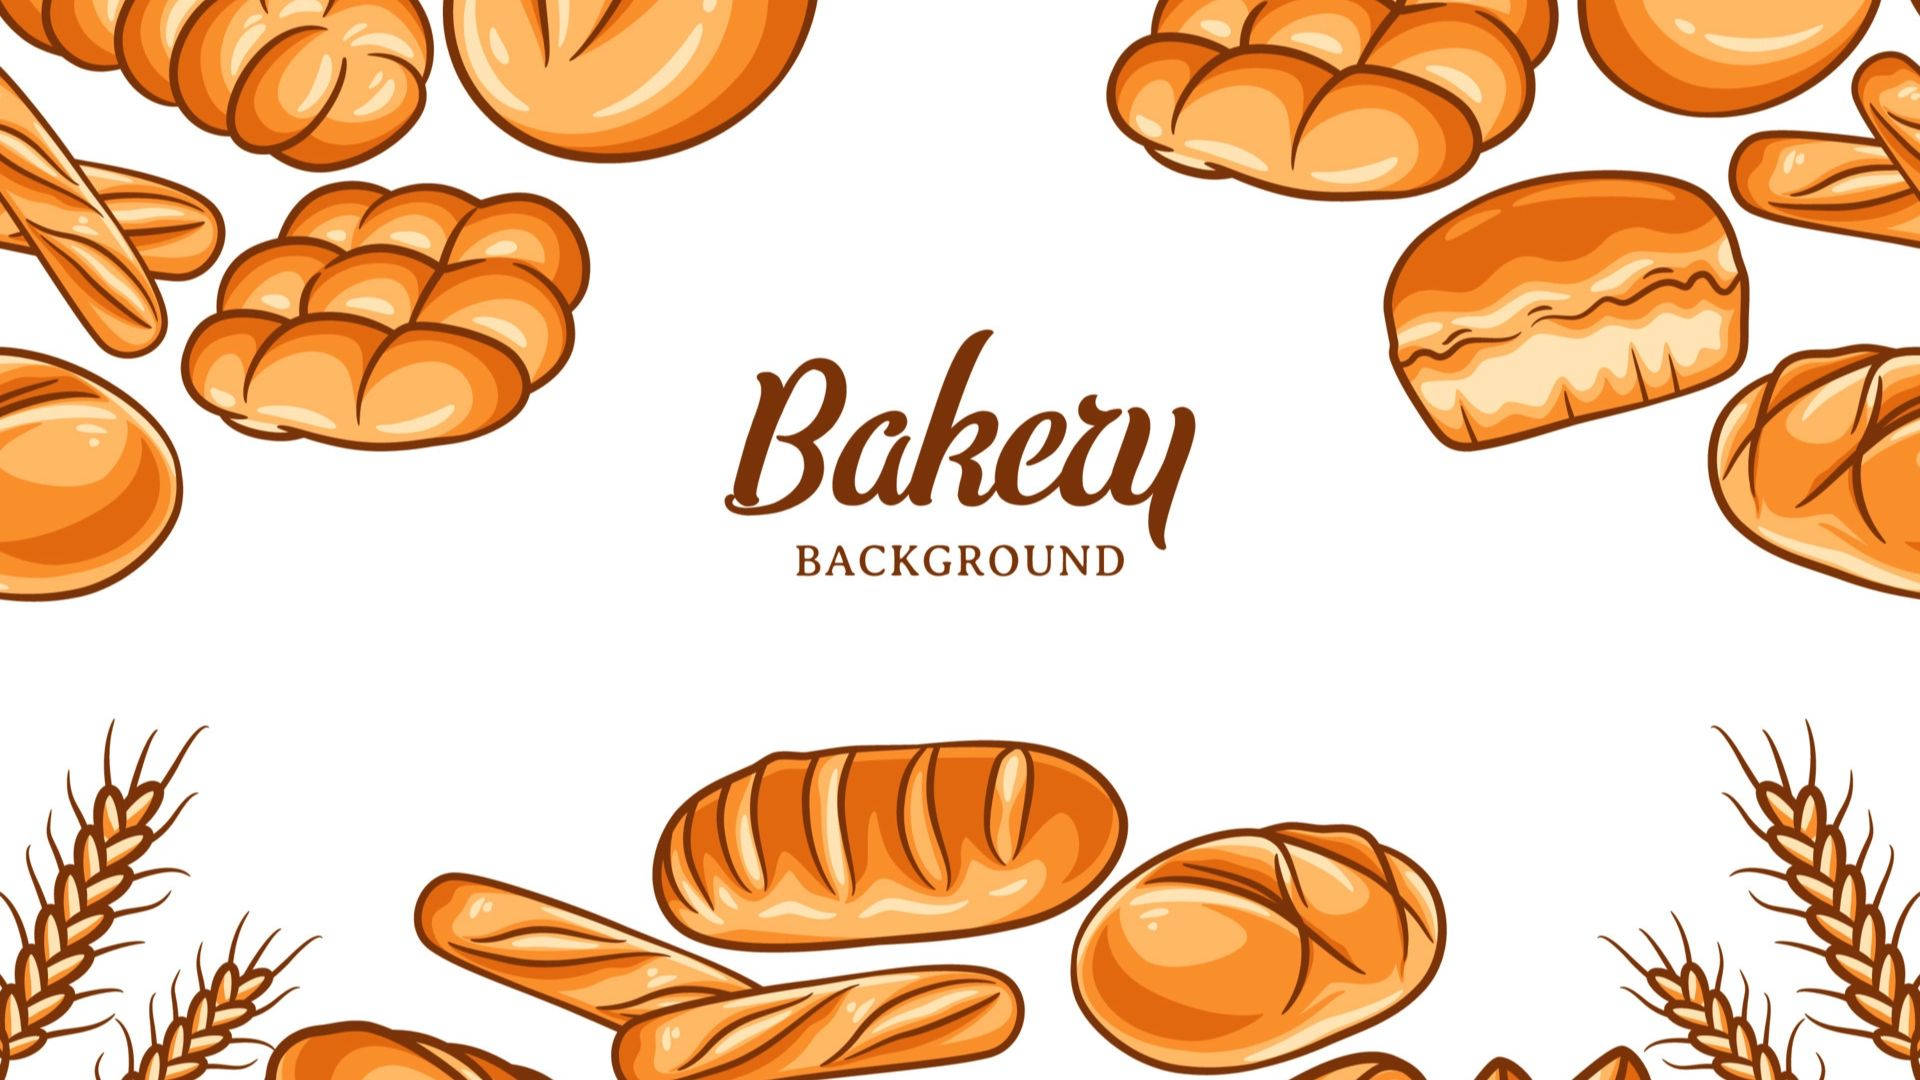 Bakery Background With Breads